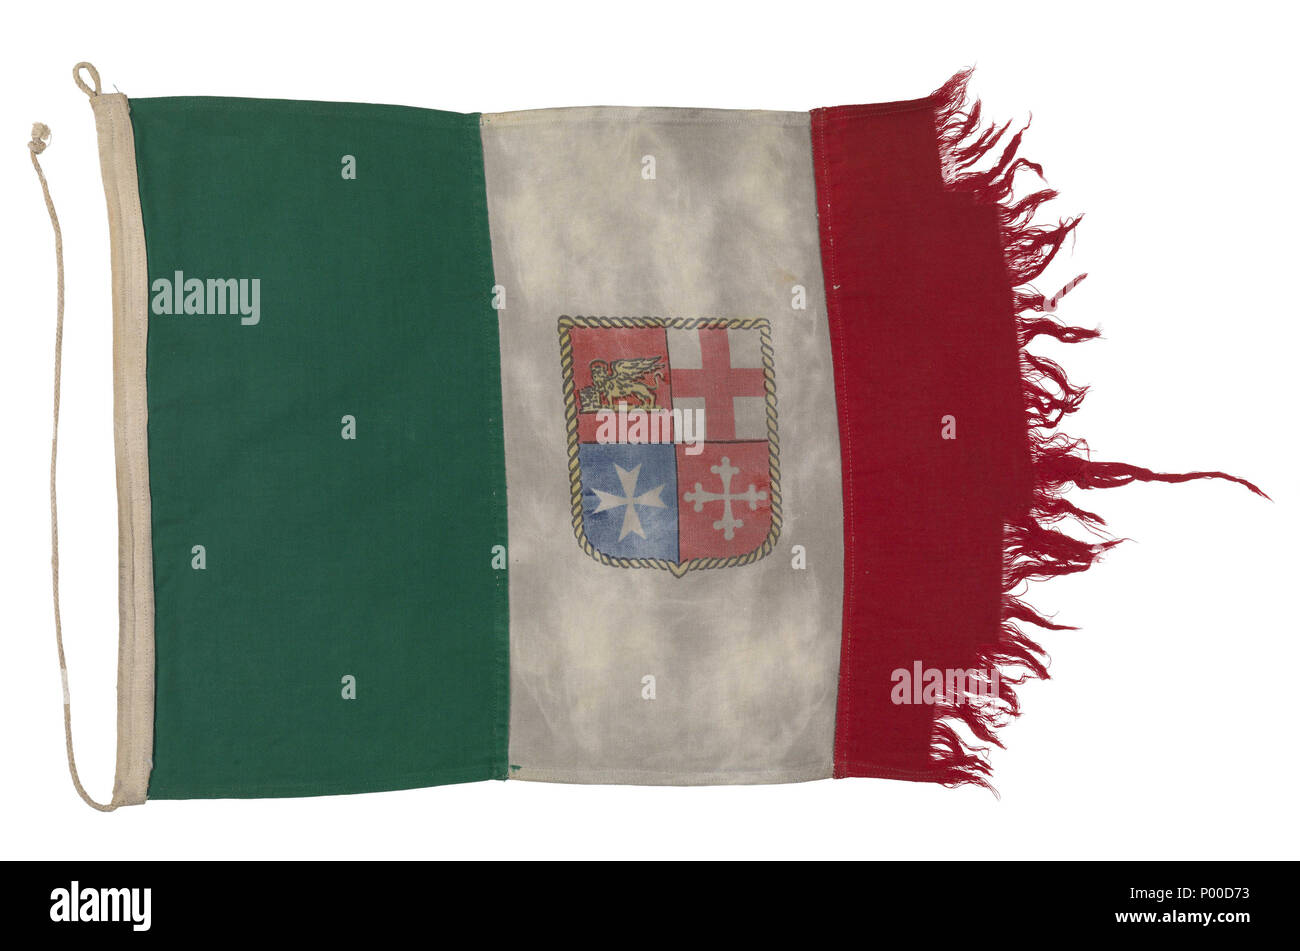 English: Italian merchant ensign (after 1946) Italian merchant ensign, after 1946 pattern, from the hydrofoil 'Freccia del Vesuvio'. The flag made of cotton bunting, machine sewn with a